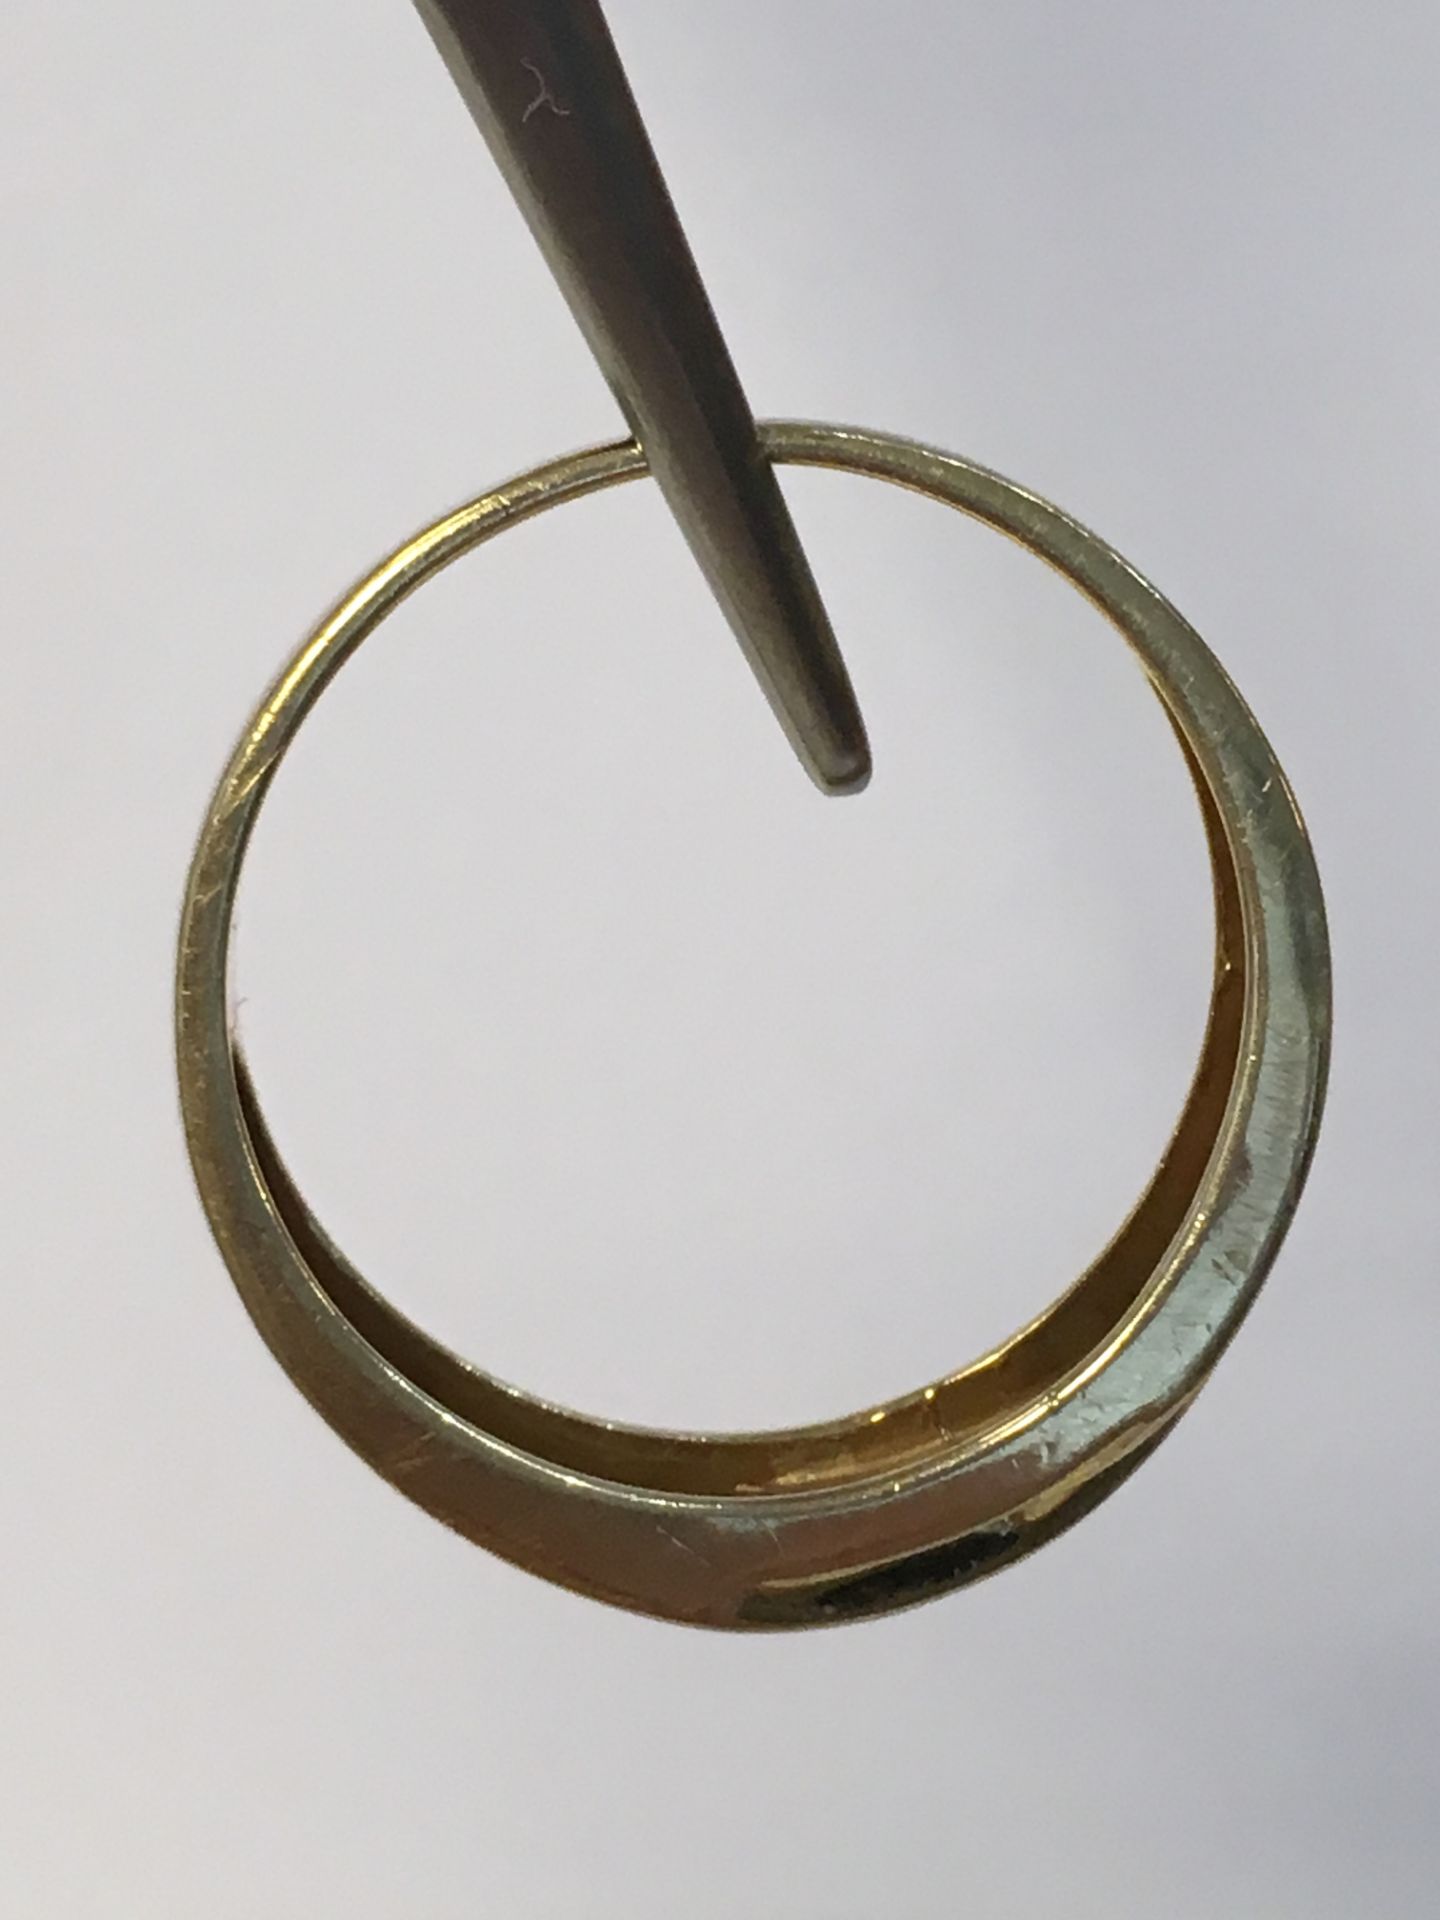 10K Yellow Gold Band with 5 Diamonds 0.08ct - Image 2 of 3